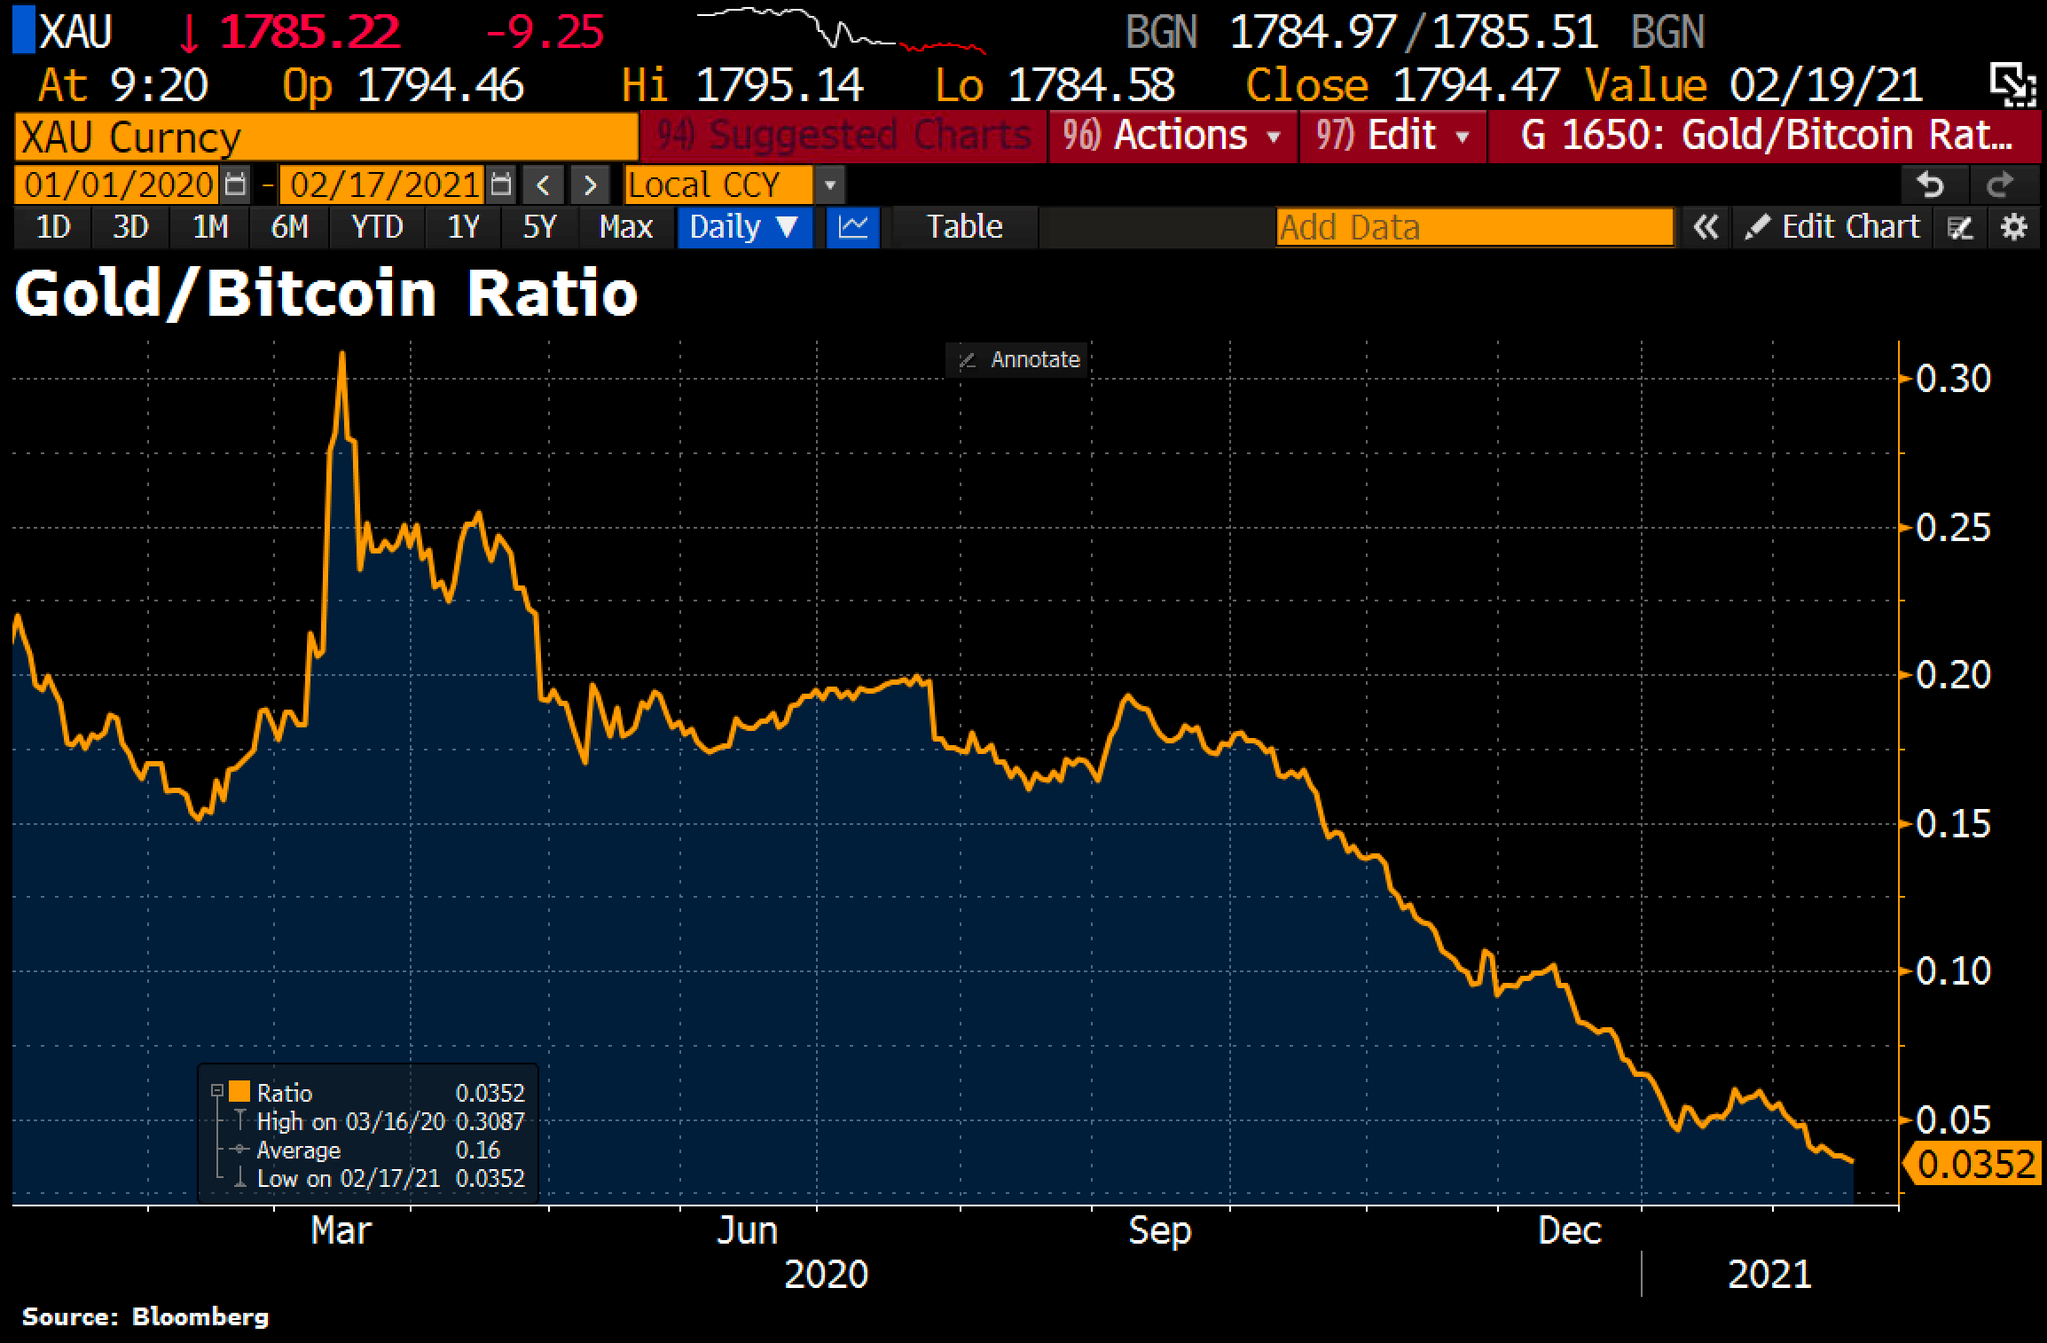 Gold / Bitcoin ratio plummets to fresh record low